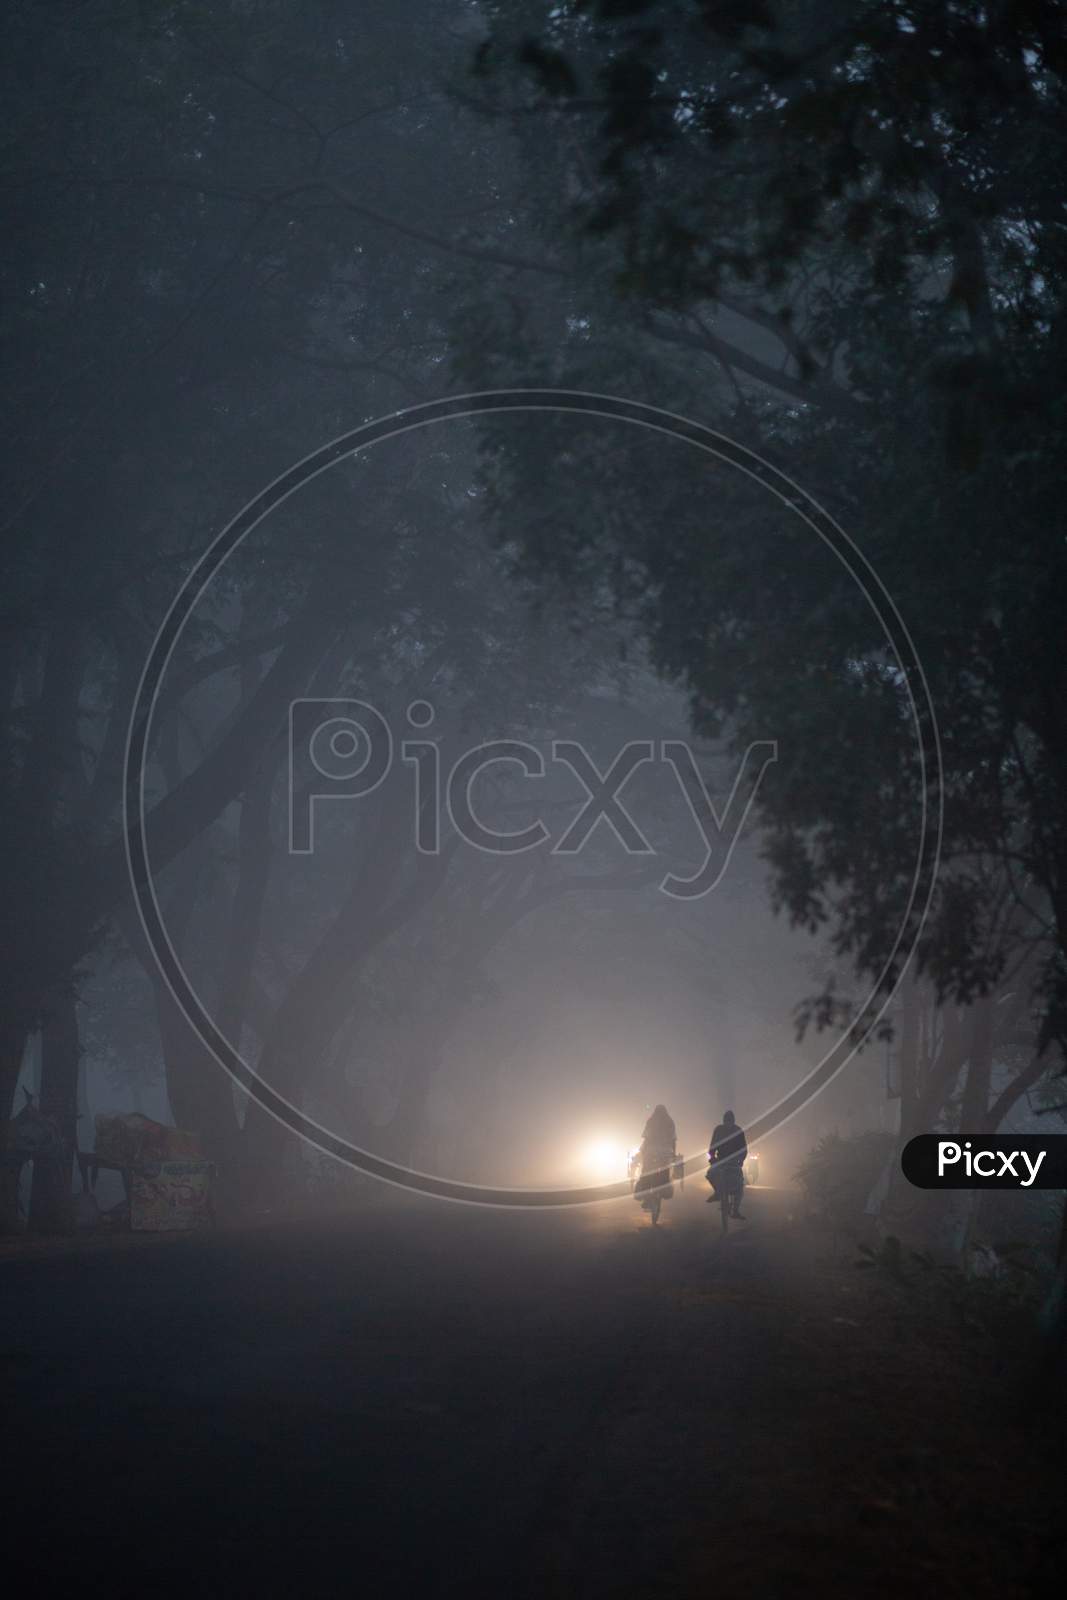 Village riding bicycle during foggy morning